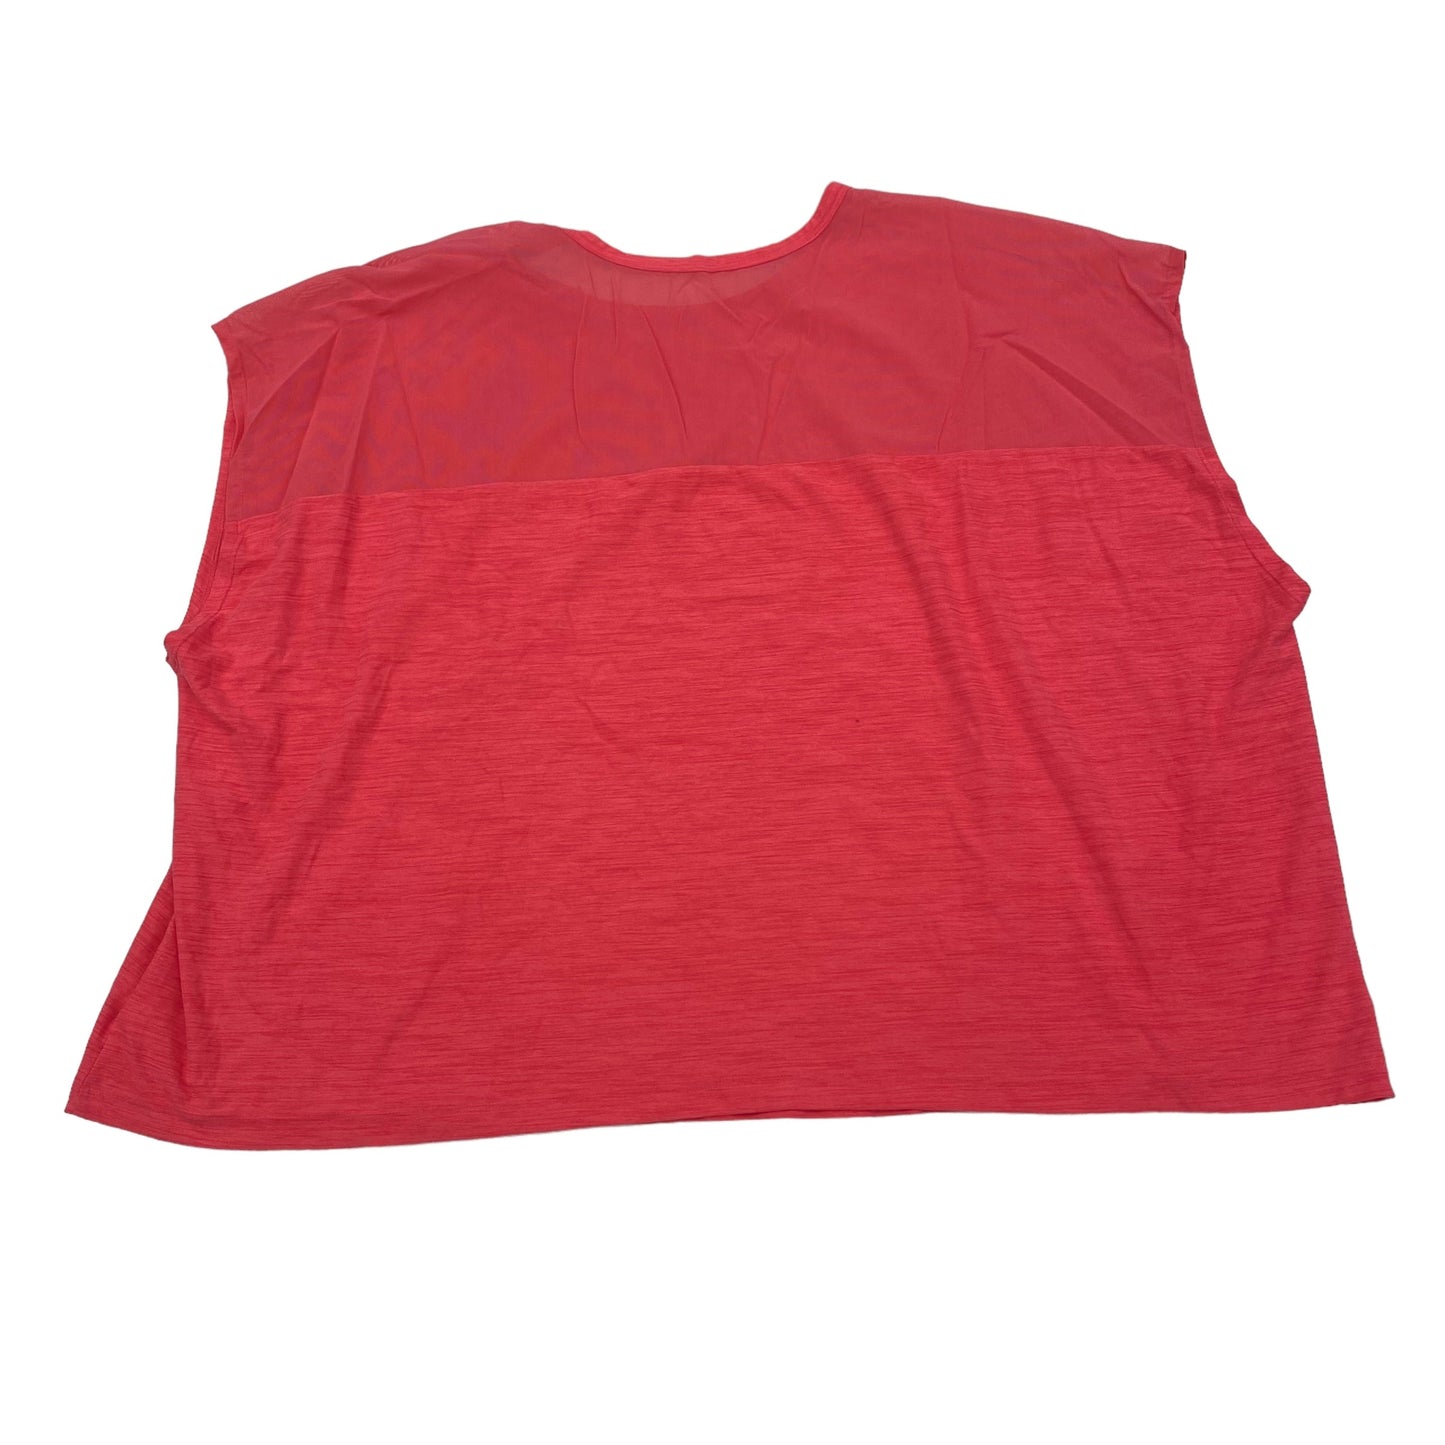 Athletic Top Short Sleeve By Old Navy  Size: 4x